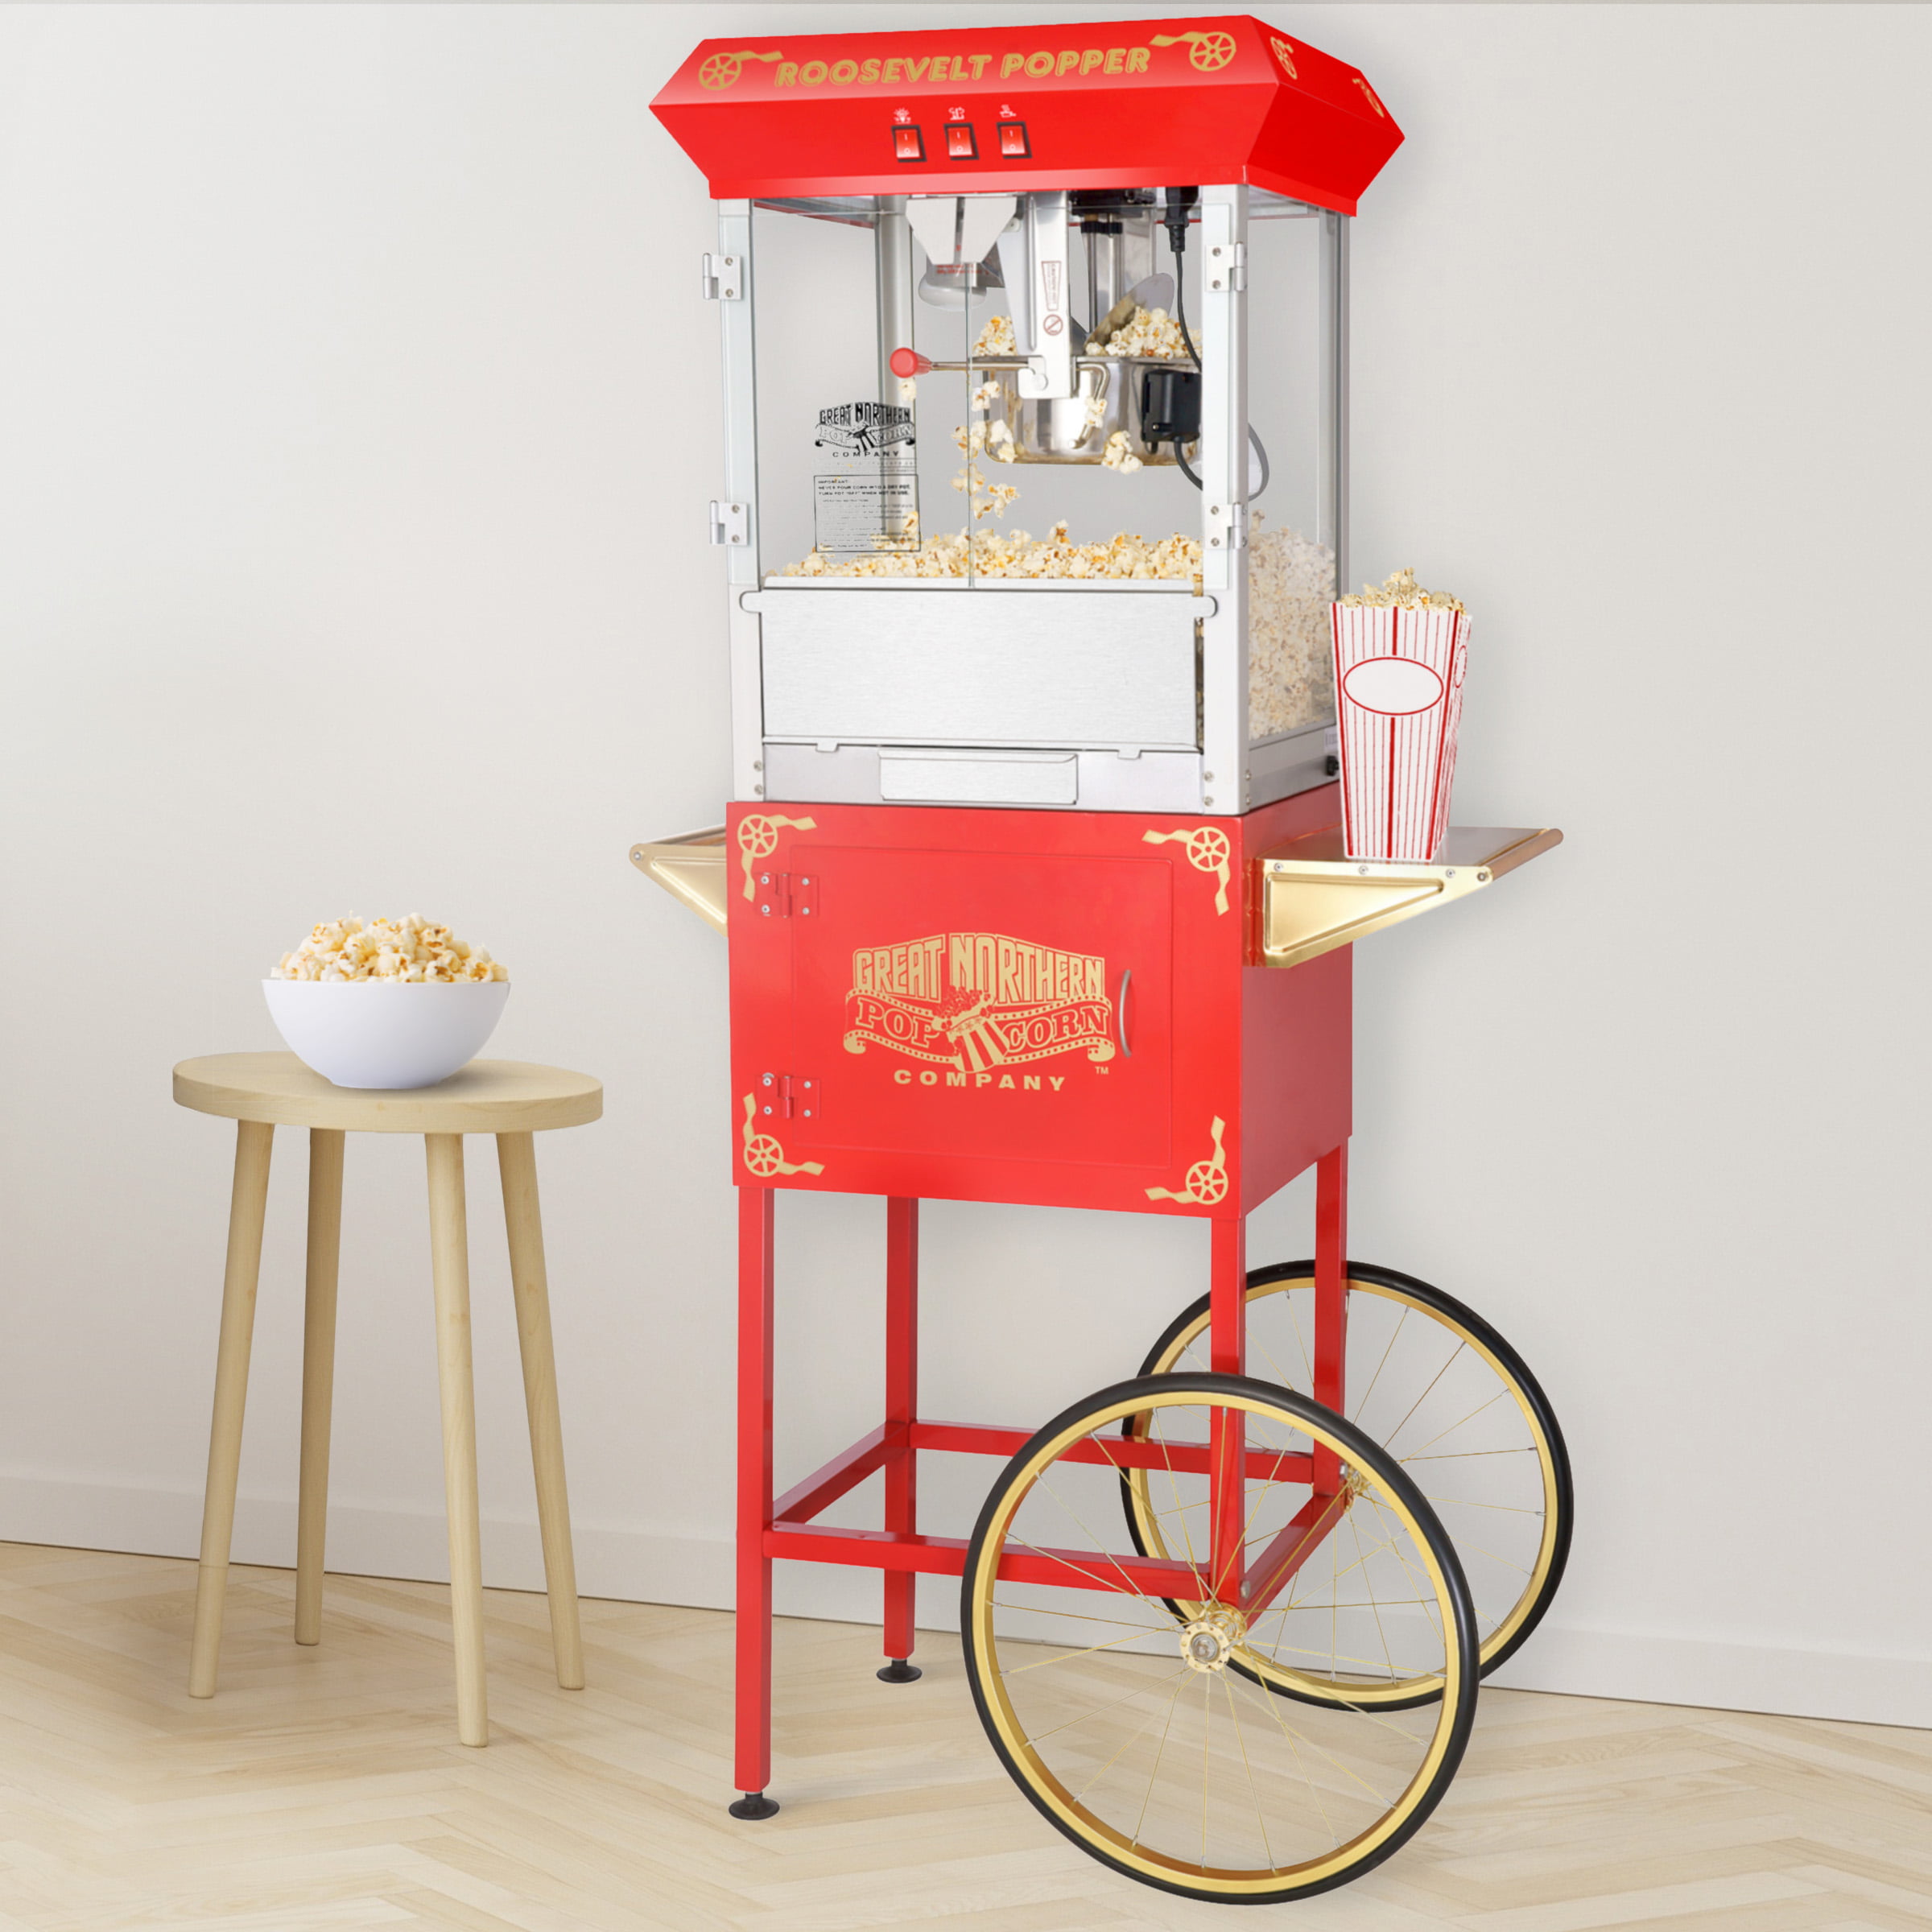 New Red 8 oz Popcorn Machine with Cart Durable Glass Cheap Party Portable  Wheels